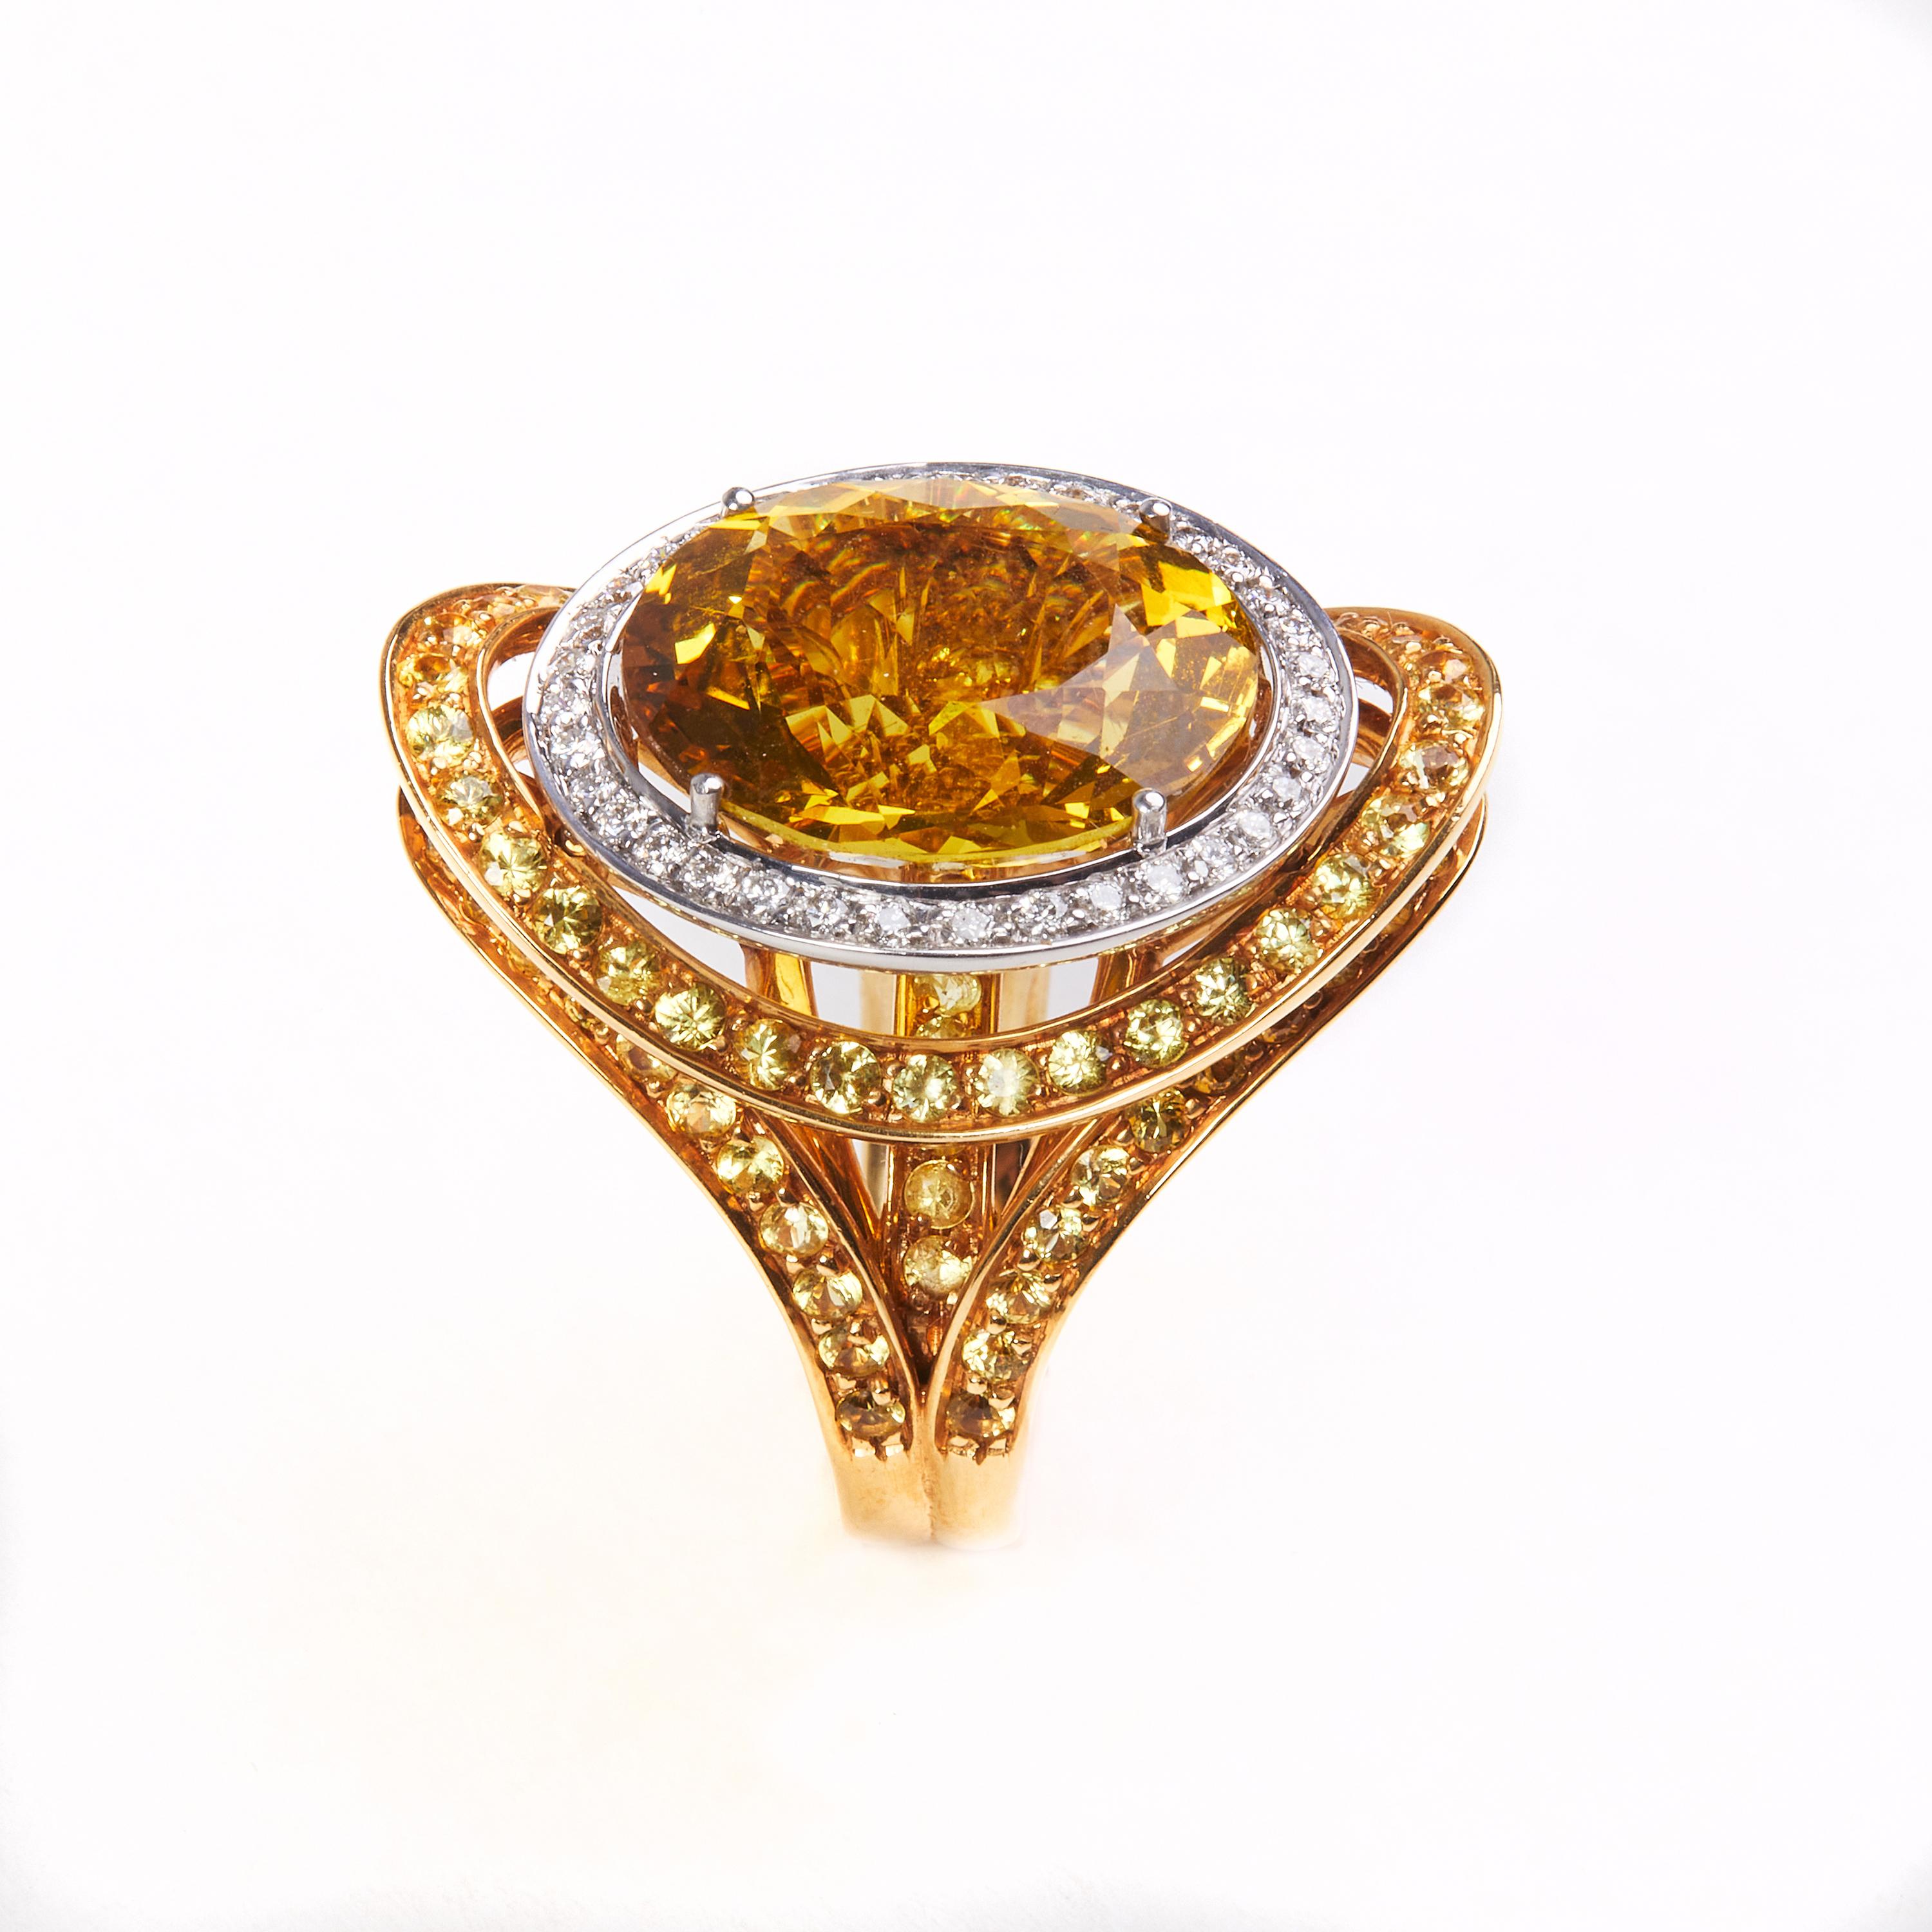 !8 kt YG Diamond, Beryl Yelow and Zaphiers
35 Diamonds 0.38 Carat
85 Saphiers yelow 3,27carat
1  Beryle 12.13  Carat

Founded in 1974, Gianni Lazzaro is a family-owned jewelery company based out of Düsseldorf, Germany.
Although rooted in Germany,